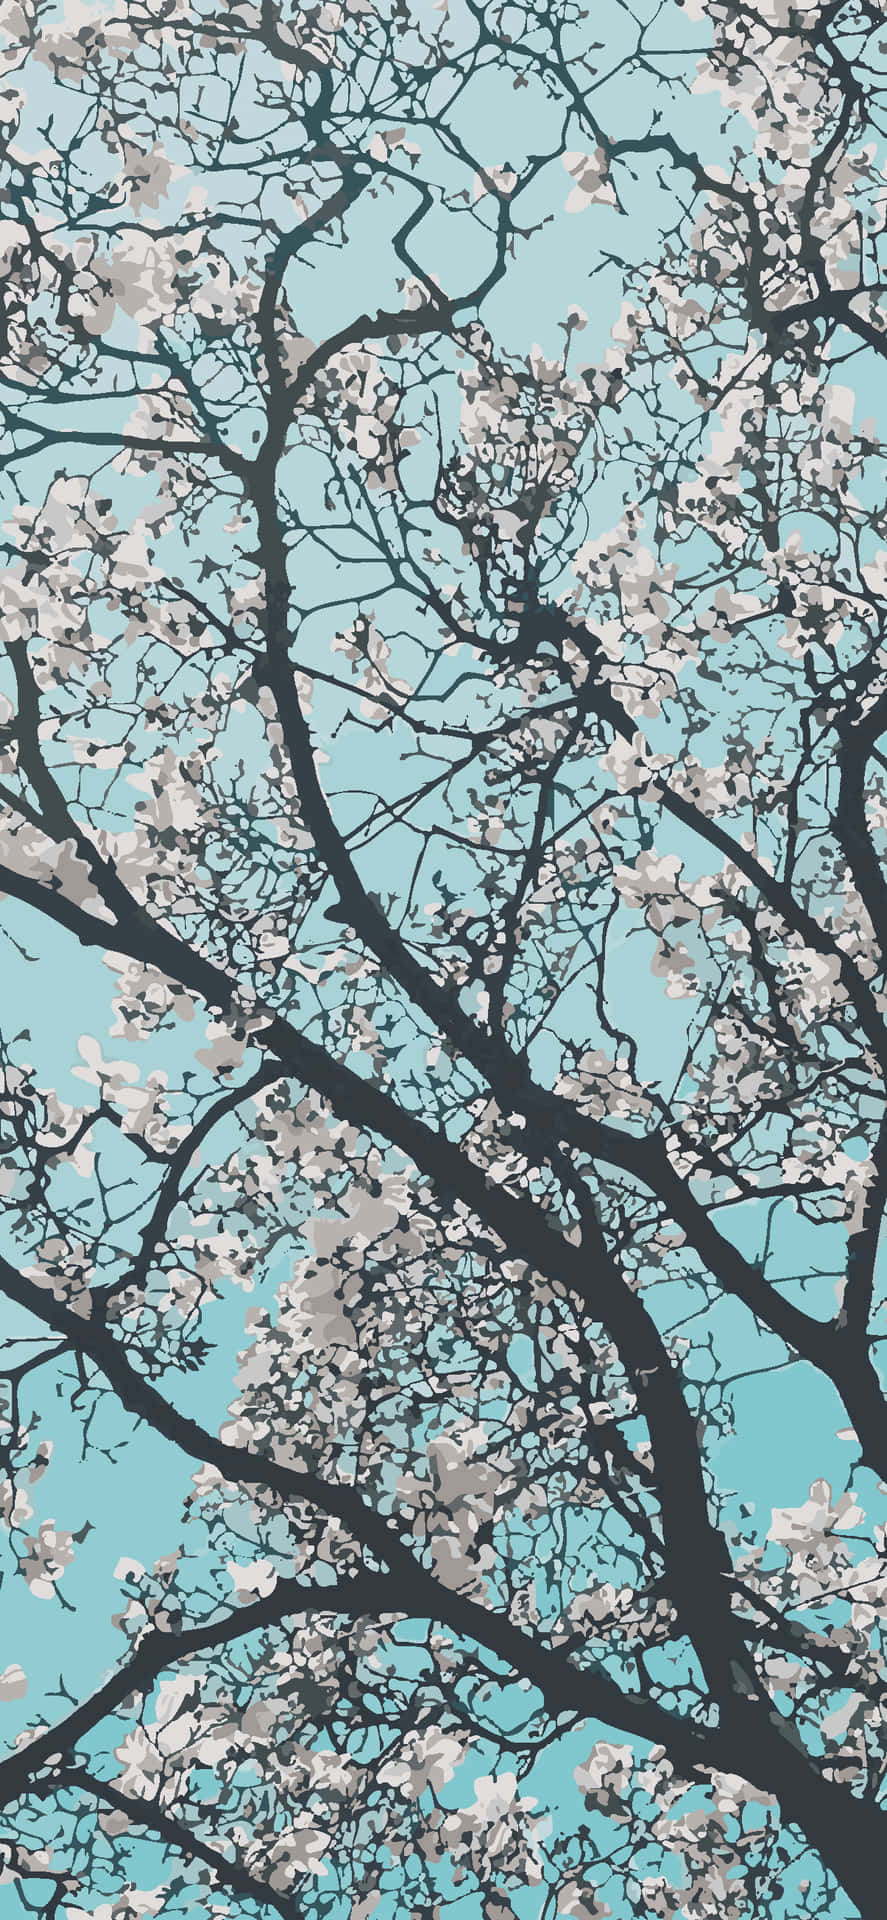 A Tree With Branches In Blue And White Wallpaper